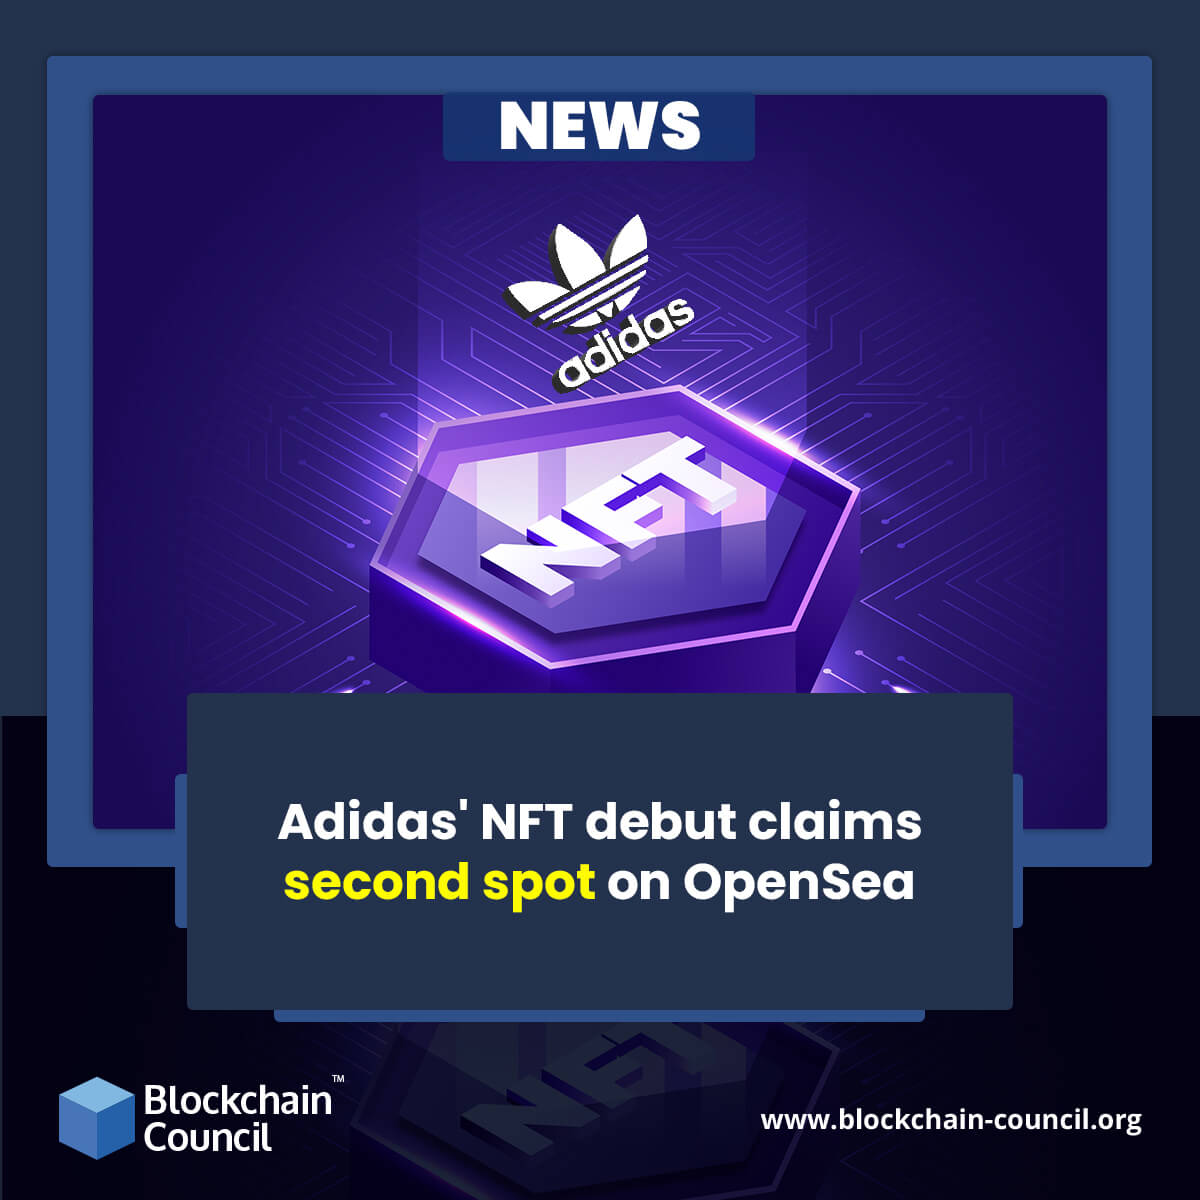 Adidas' NFT debut claims second spot on OpenSea